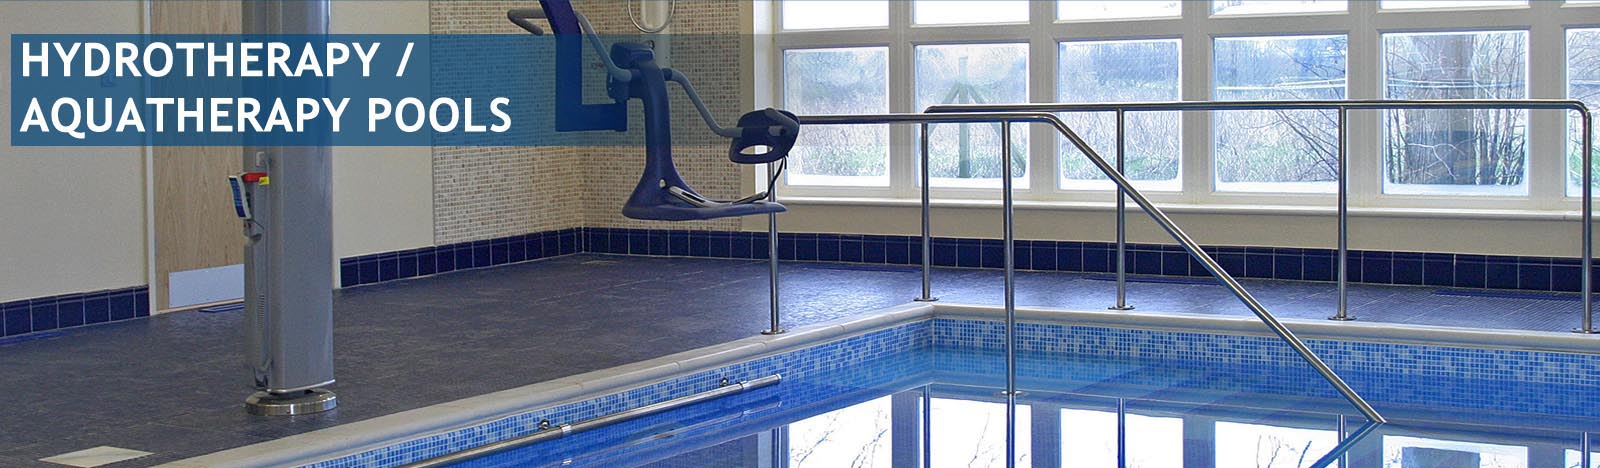 hydrotherapy pools specialists scotland